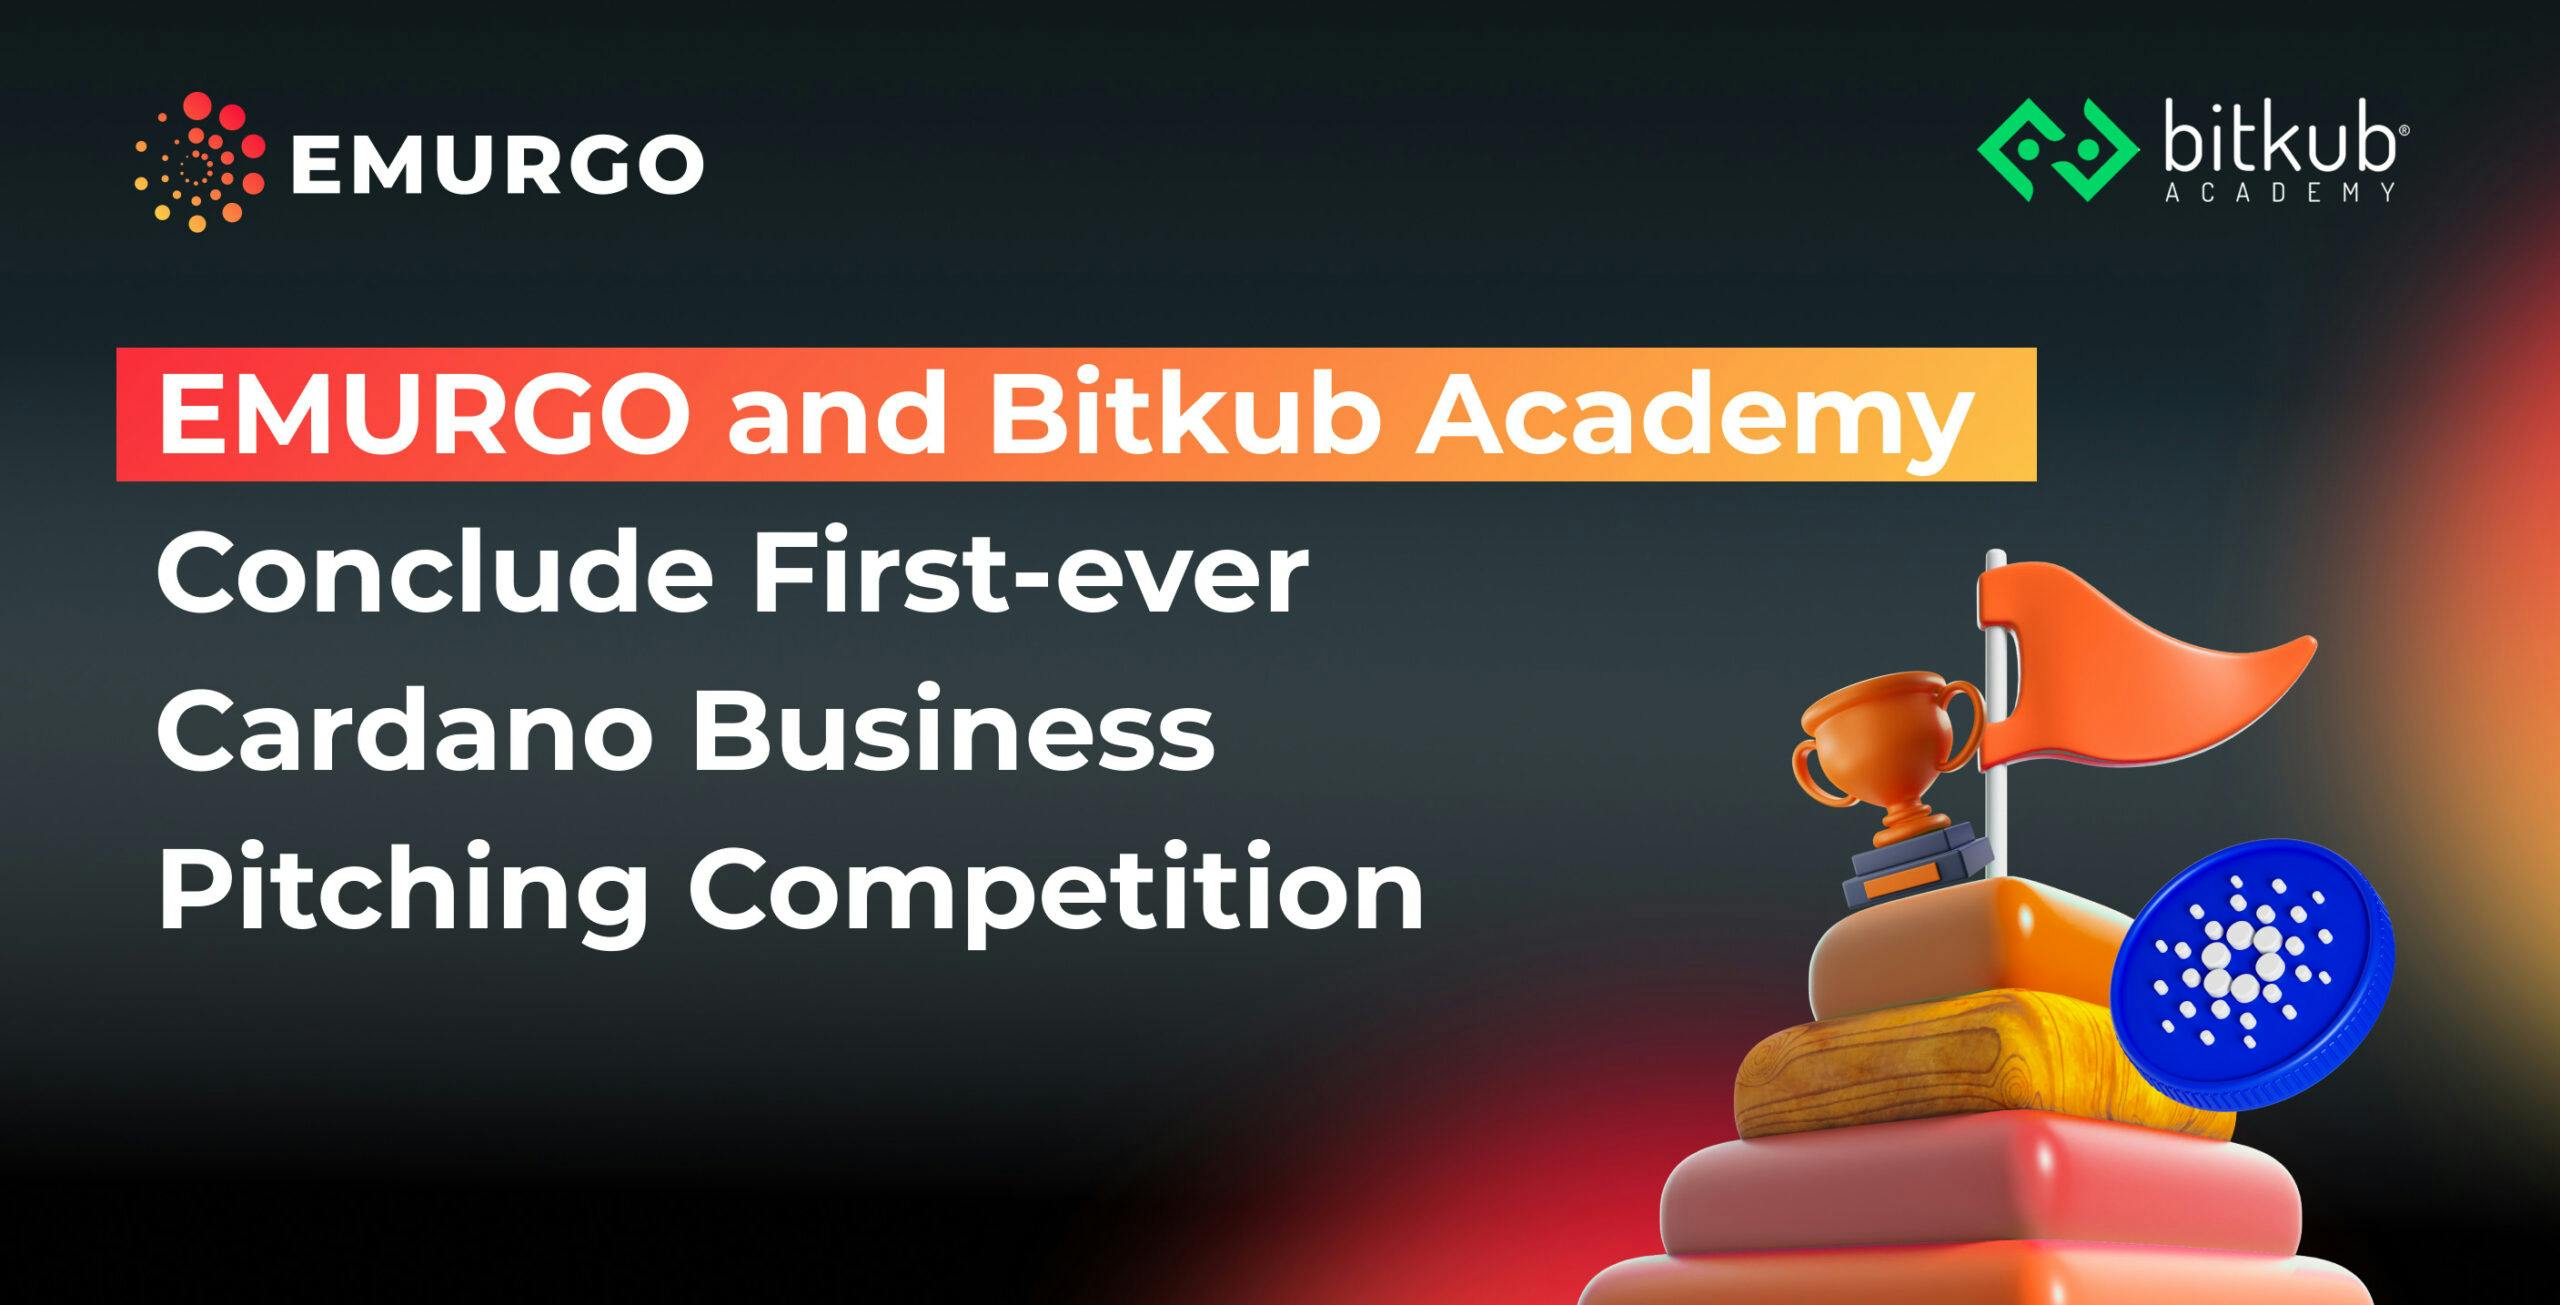 EMURGO-and-Bitkub-Academy-Conclude-First-Ever-Cardano-Business-Pitching-Competition-scaled-1.jpg